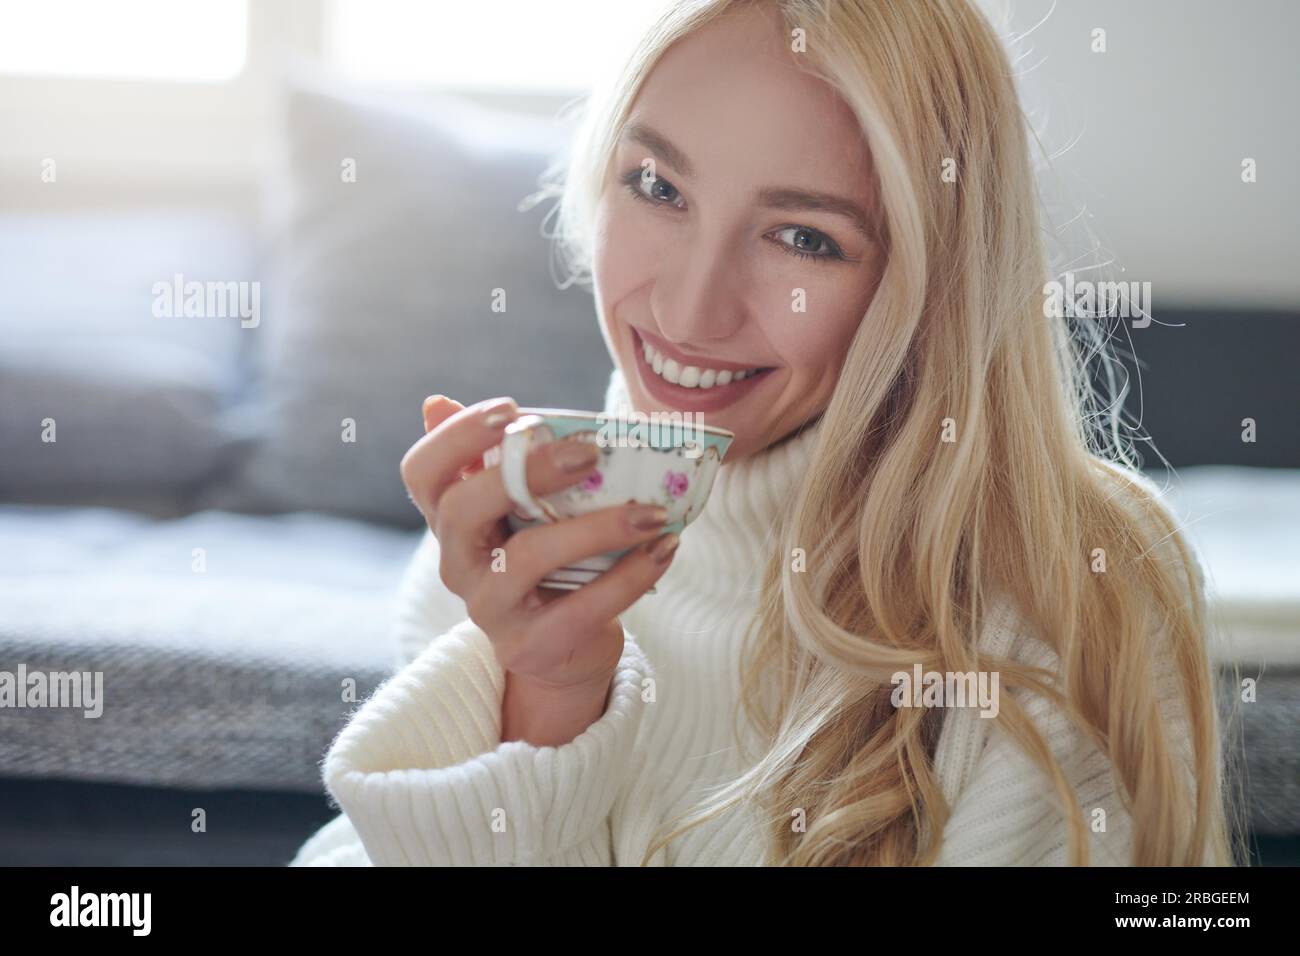 Pretty woman with long blond hair drinking tea from a porcelain cup looking at the camera with a sweet beaming smile of pleasure indoors at home Stock Photo